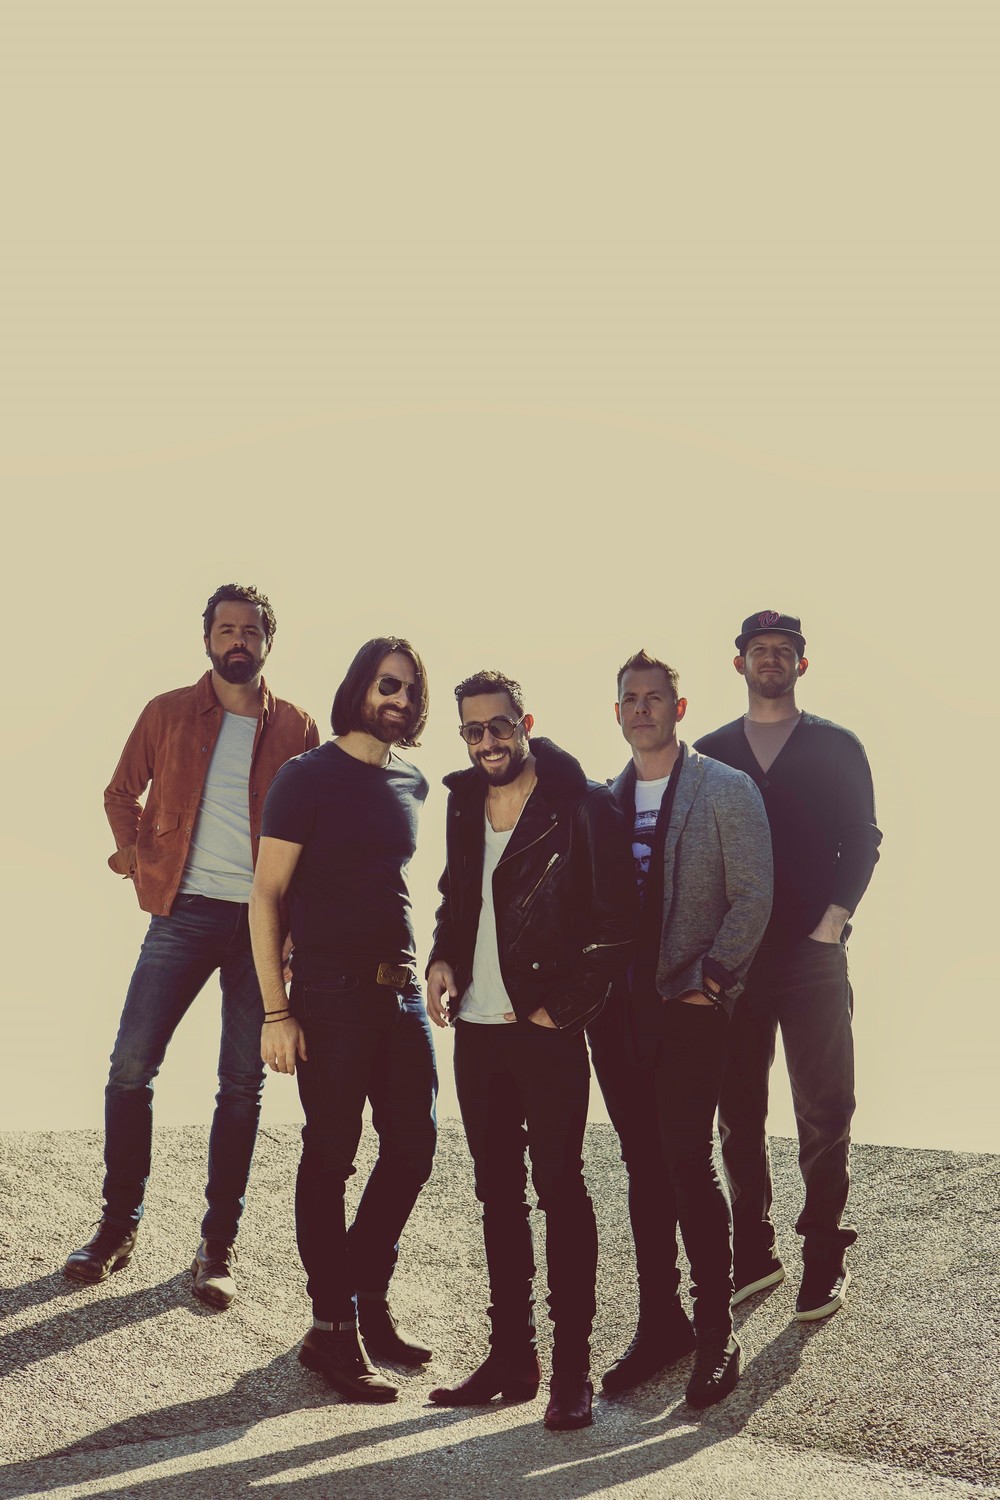 Country band Old Dominion will play at the St. Augustine Amphitheatre on Nov. 30.